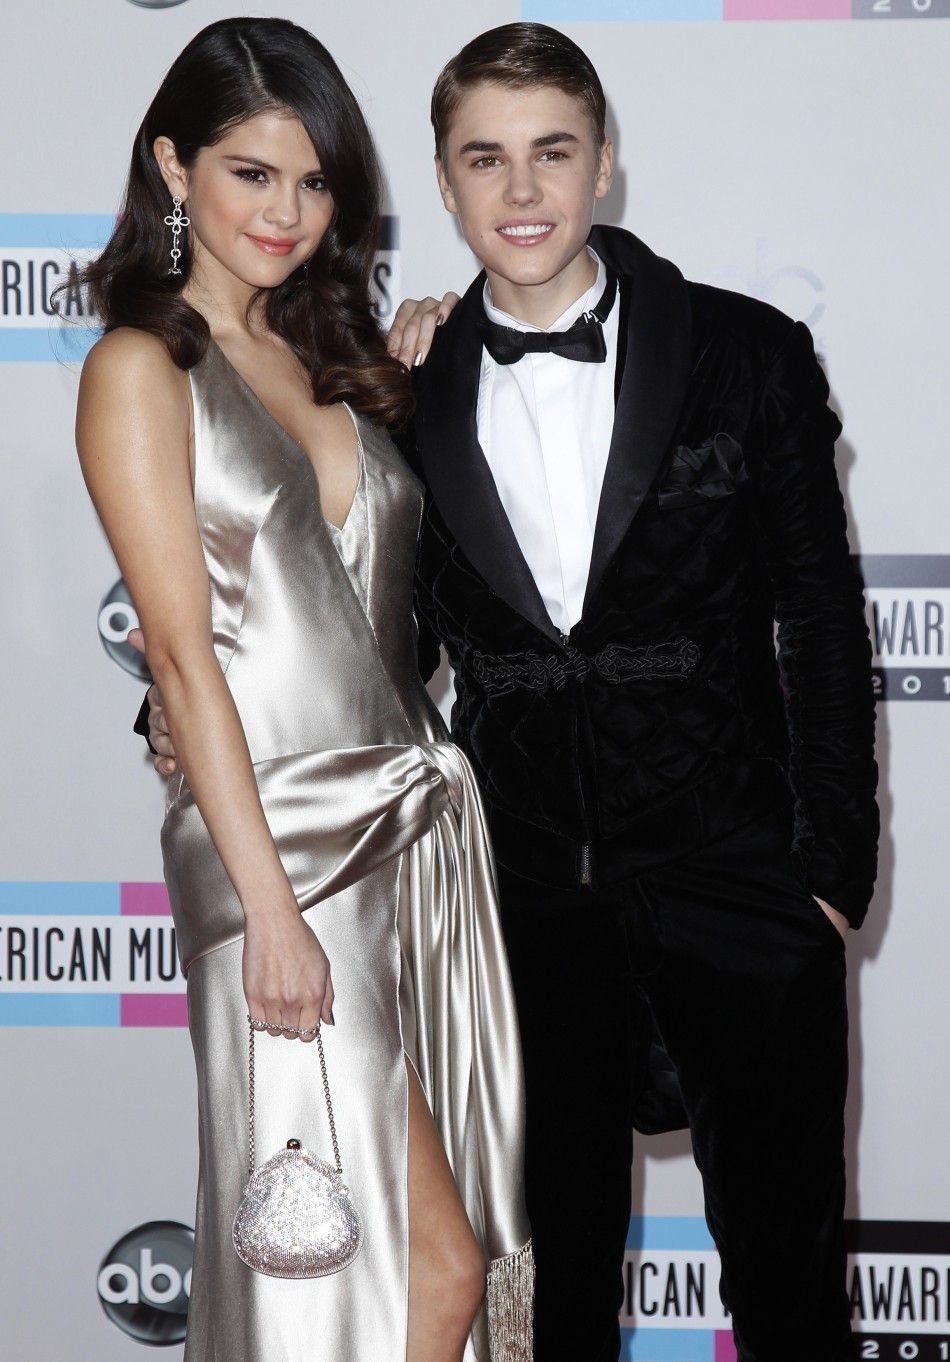 Singer Justin Bieber and his girlfriend, singer Selena Gomez clearly in love 